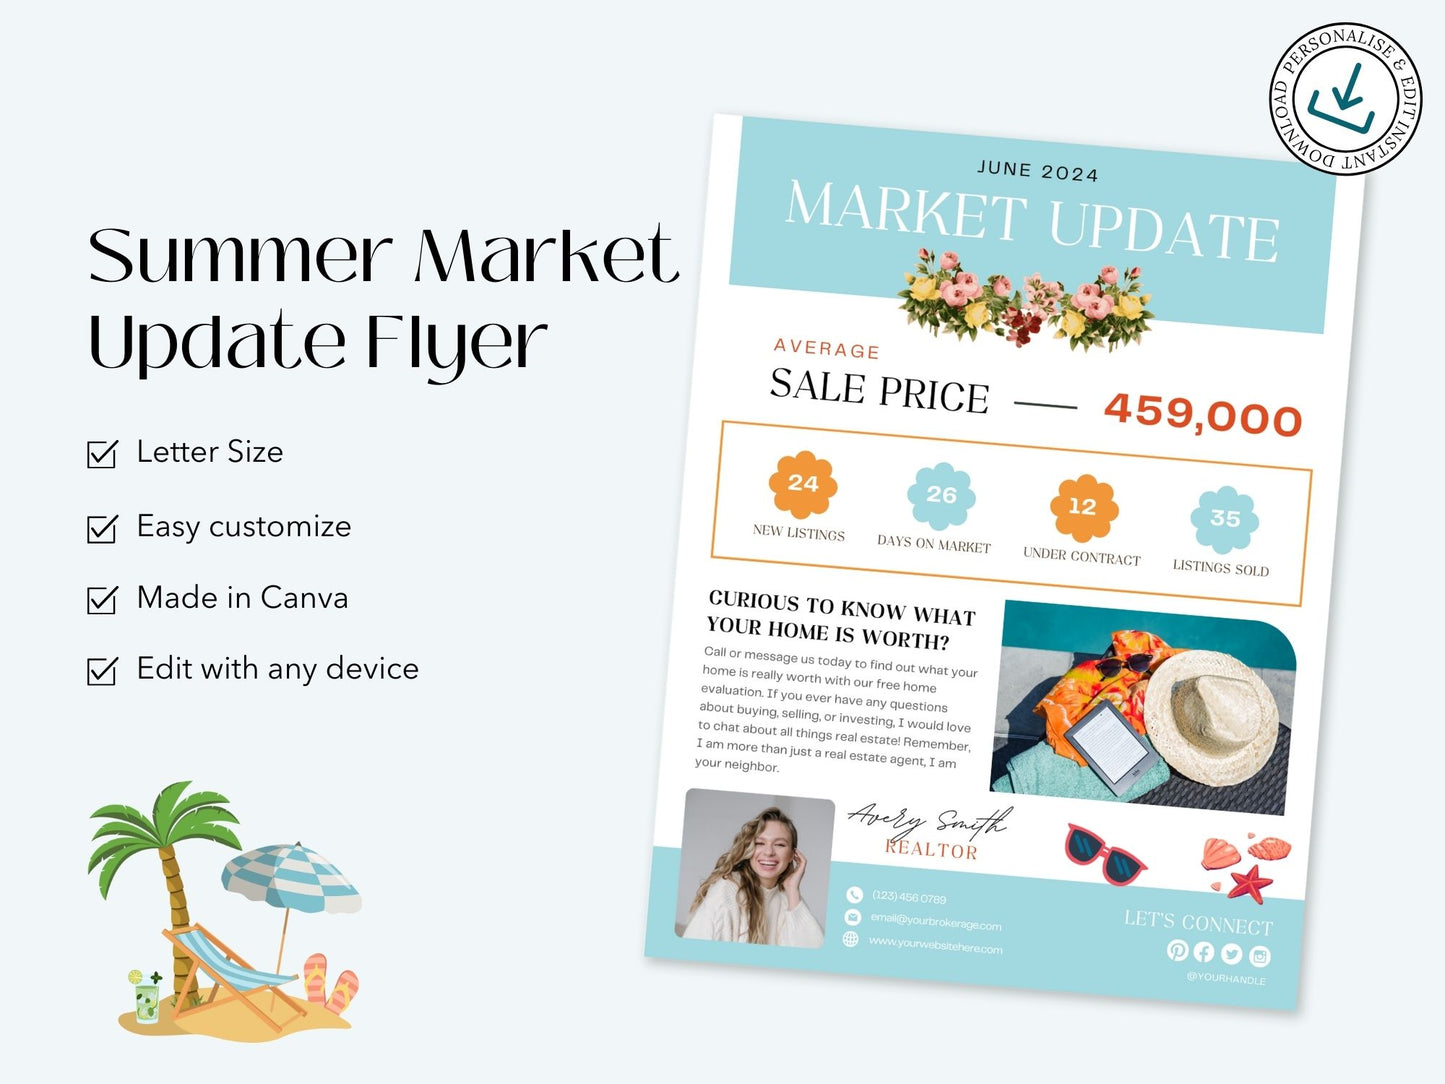 Summer Market Update Flyer - Stay informed with valuable insights into the summer real estate market.